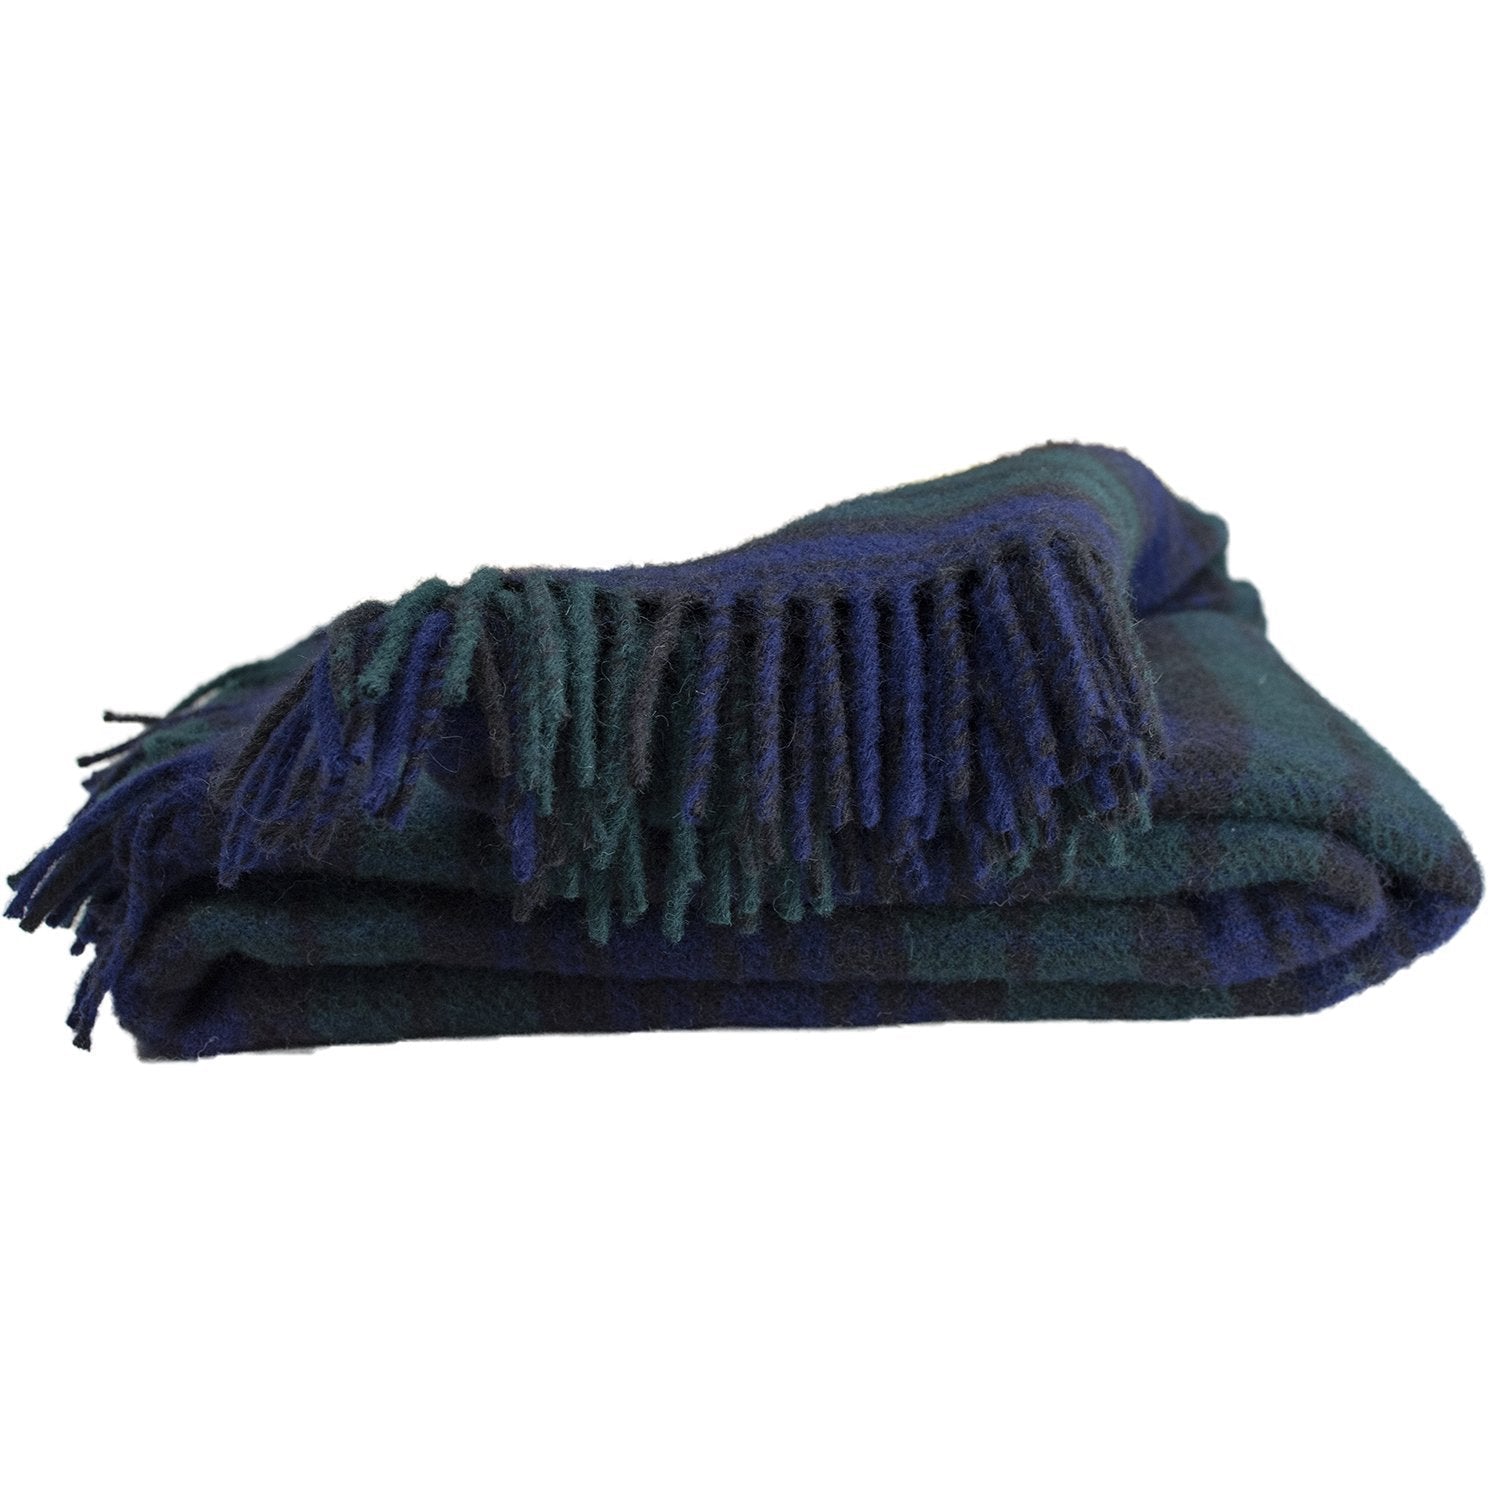 Prince of Scots Highland Tweed Pure New Wool Fluffy Throw ~ Black Watch ~-Throws and Blankets-Prince of Scots-00810032750244-K4050018-001-Prince of Scots